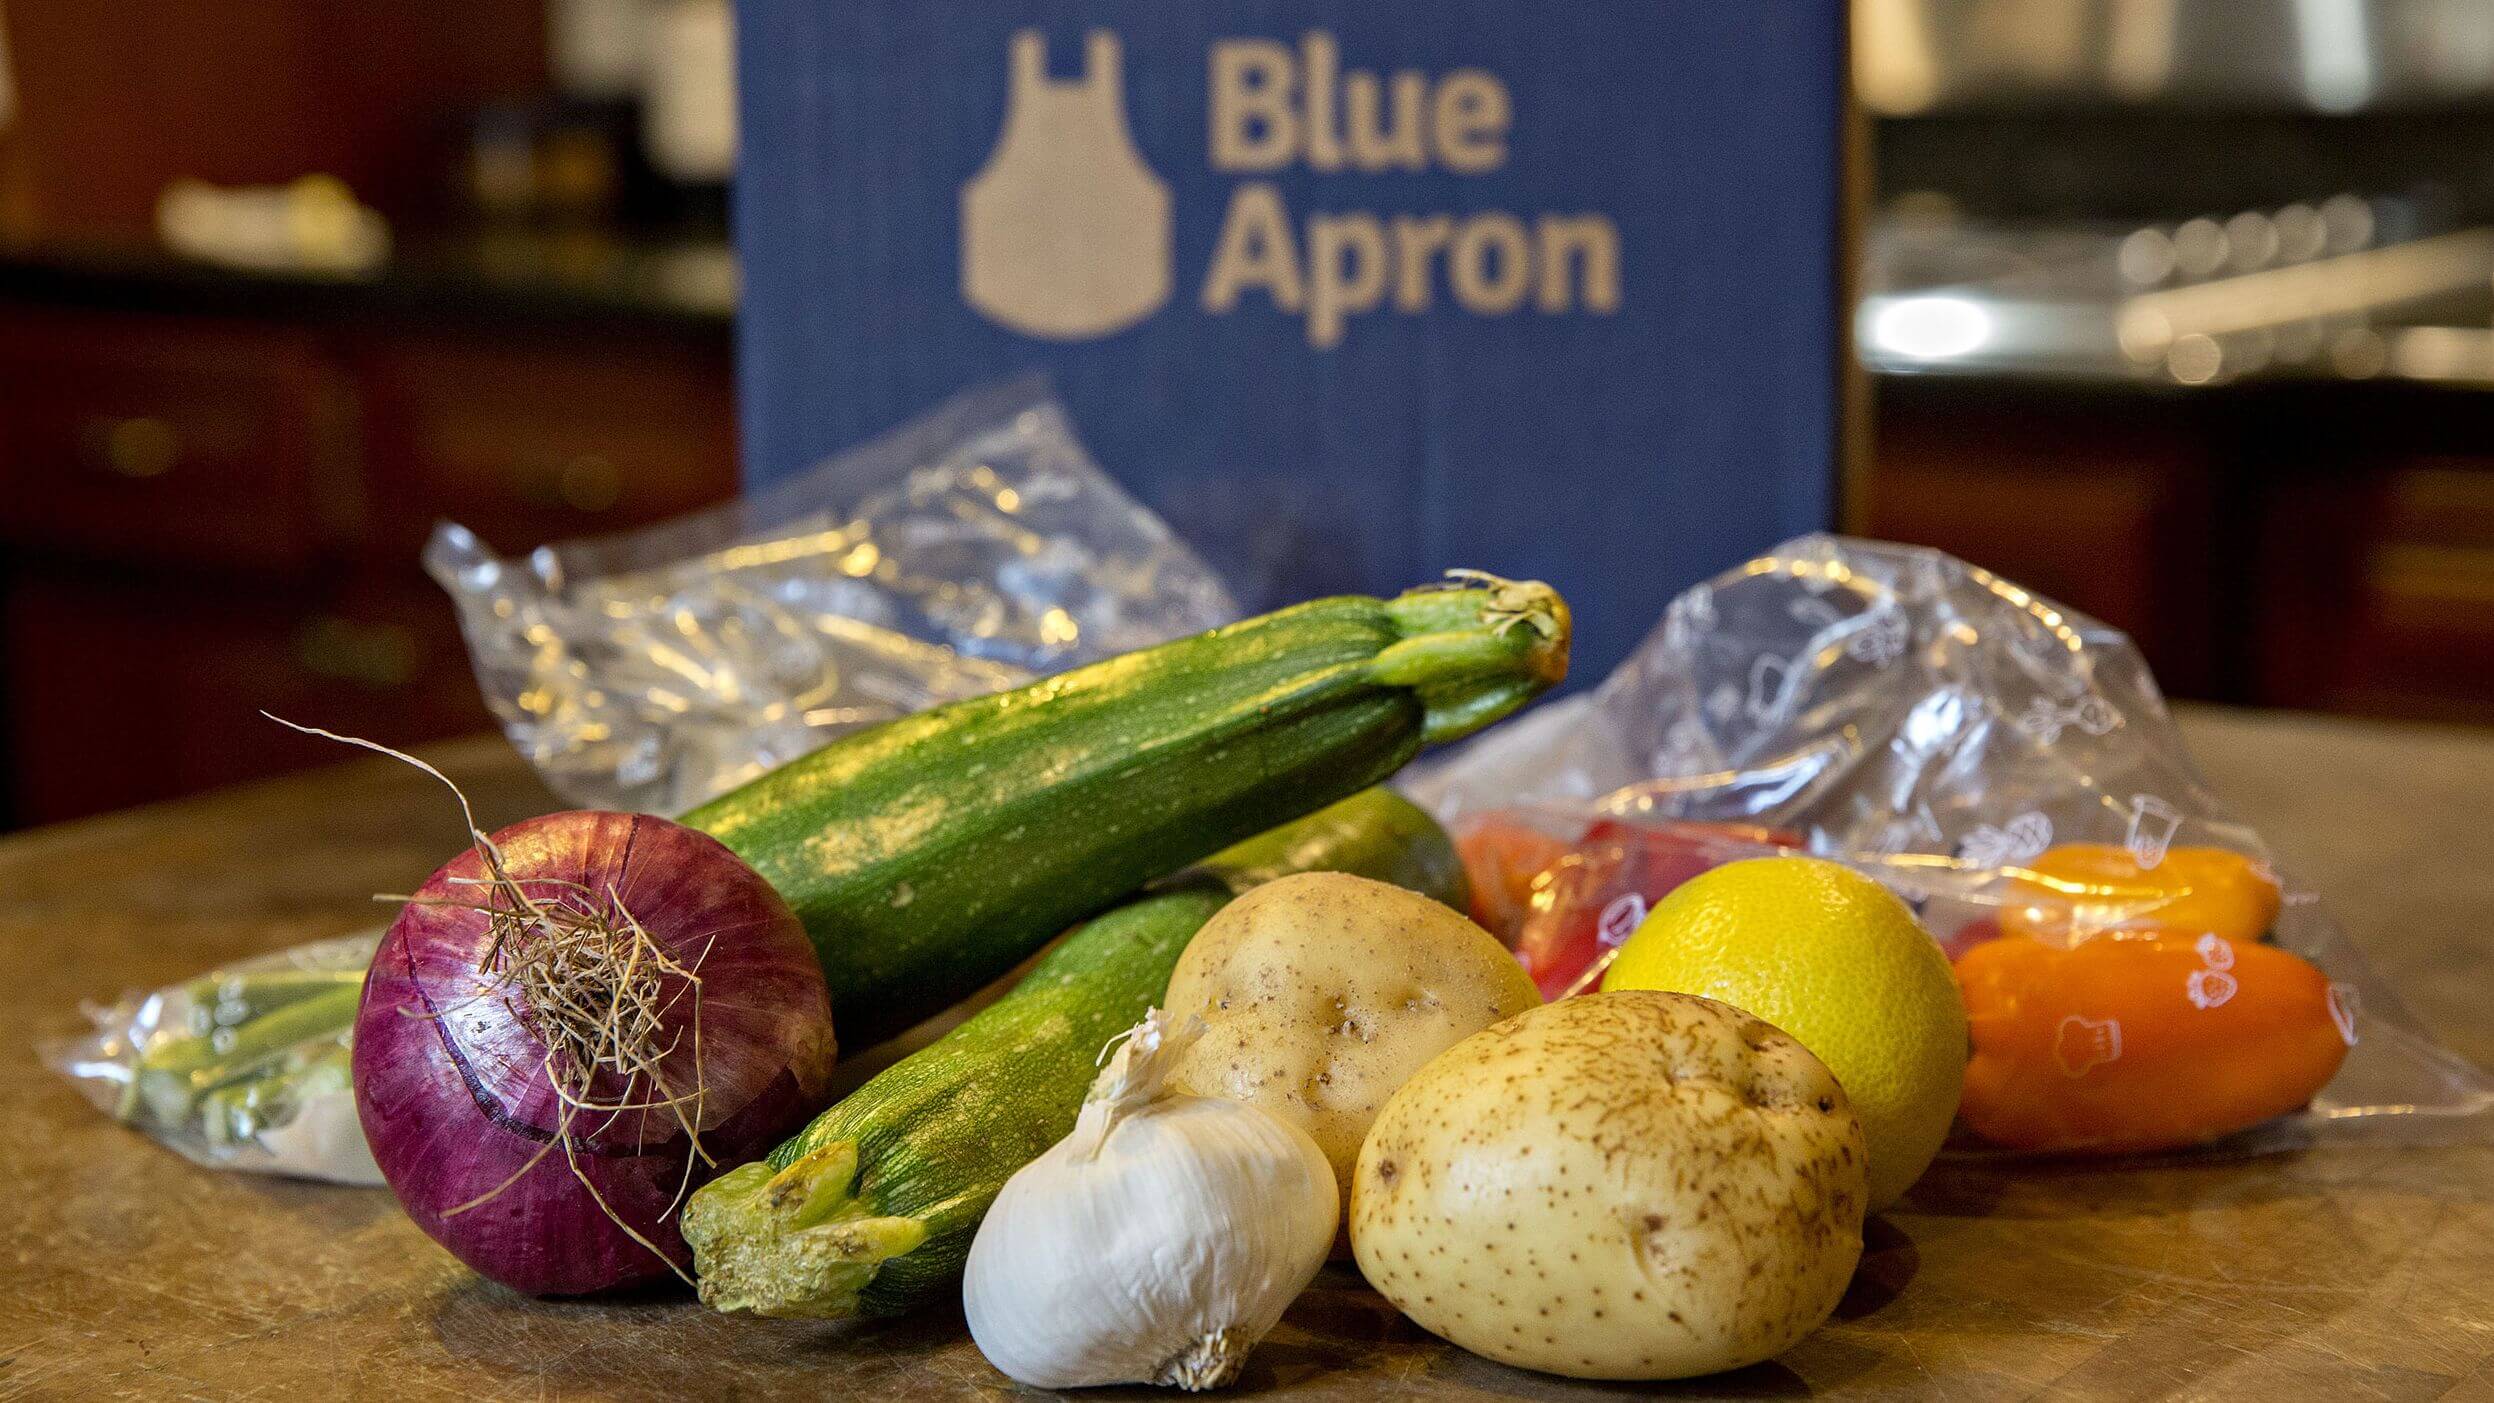 Rebounds Blue Apron Job Cuts and Strategic Moves to Boost Stock Price